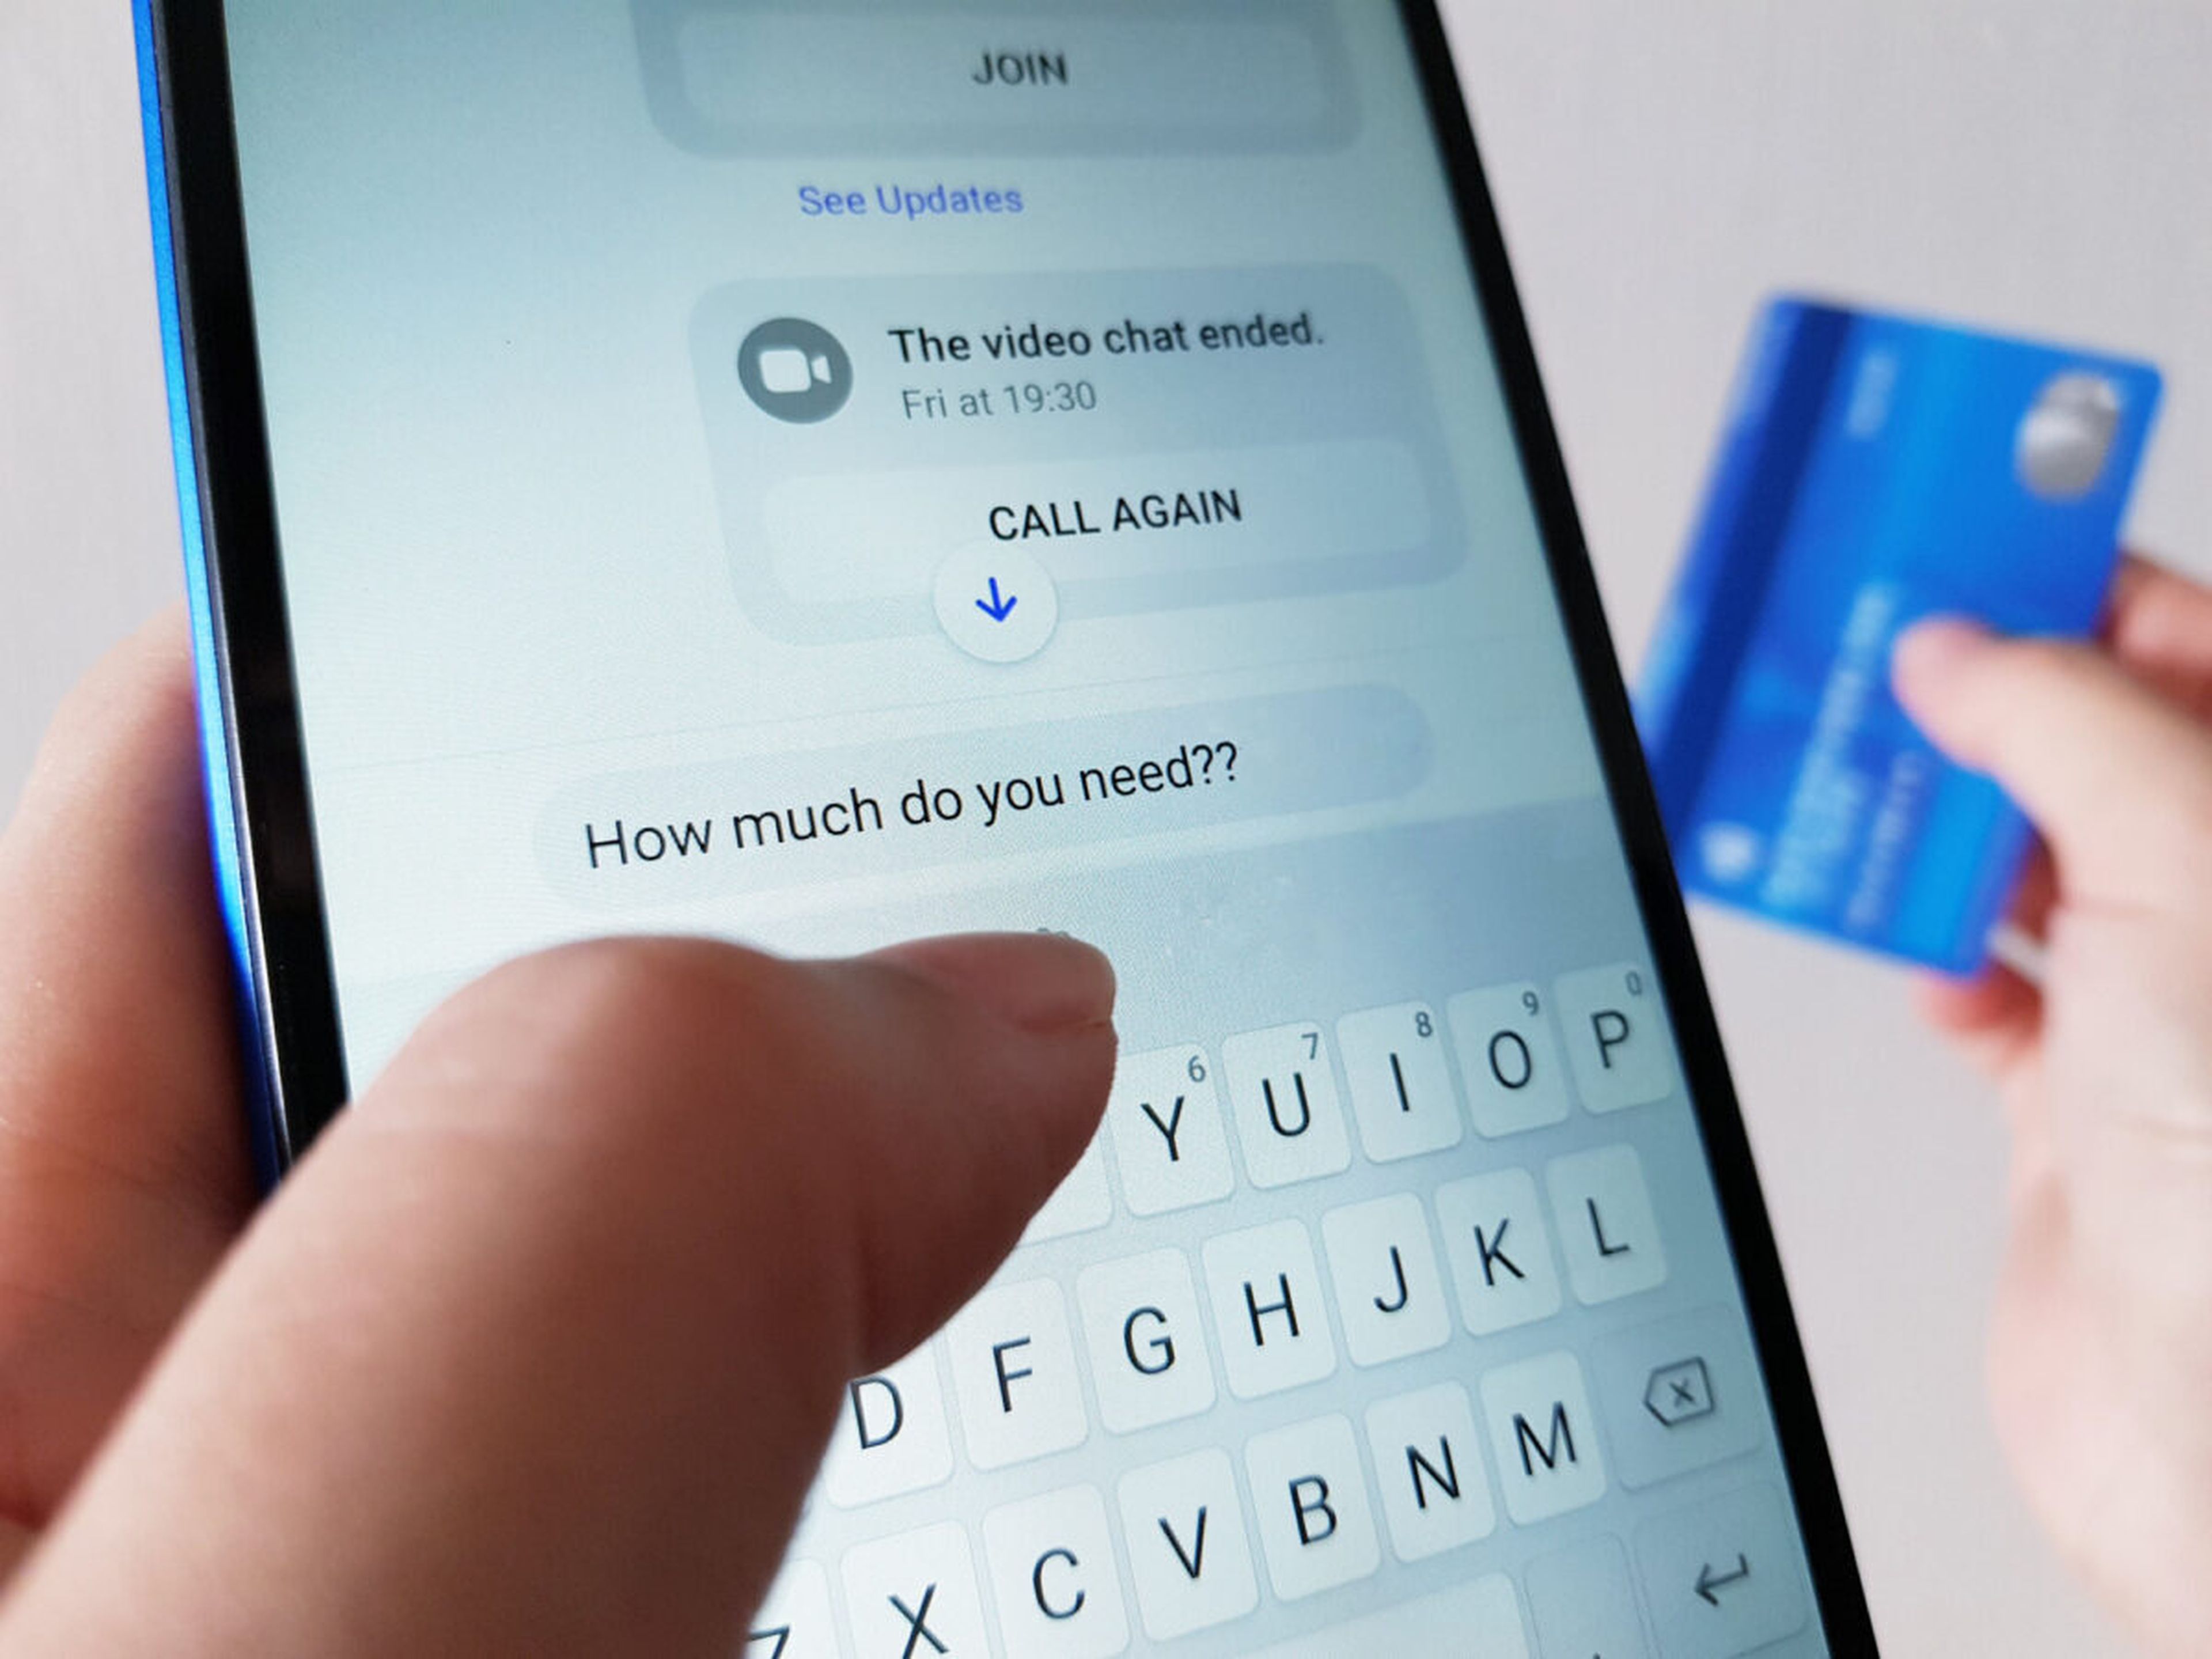 According to the U.S. Public Interest Research Group, the number of automated texts sent to American consumers increased from 1 billion a month in June 2021 to 15 billion a month in January 2023. (Image credit: celiaosk via Getty Images)